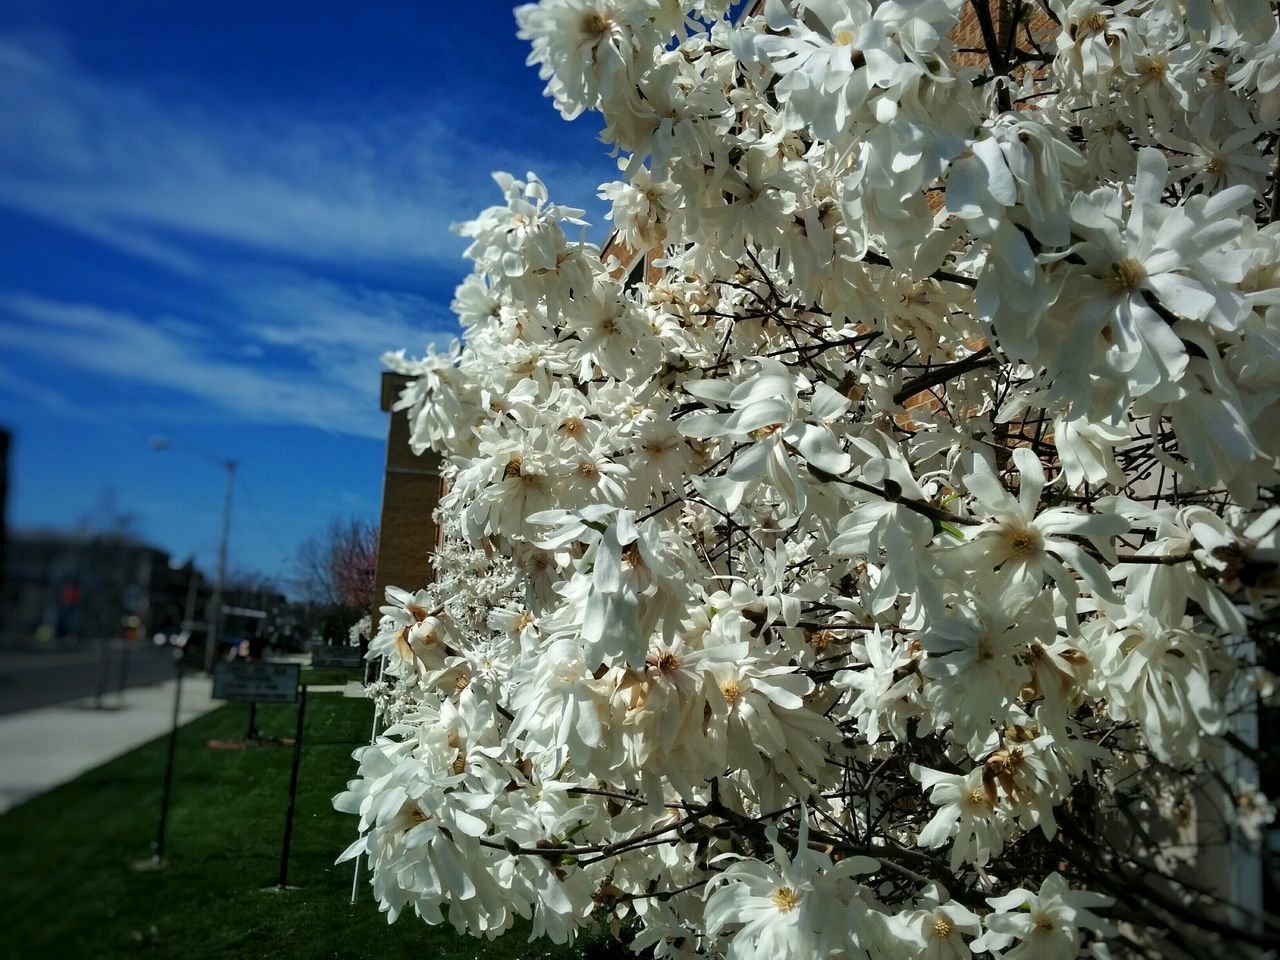 flower, tree, cherry blossom, white color, branch, freshness, fragility, blossom, growth, sky, cherry tree, nature, blooming, petal, beauty in nature, in bloom, focus on foreground, season, low angle view, close-up